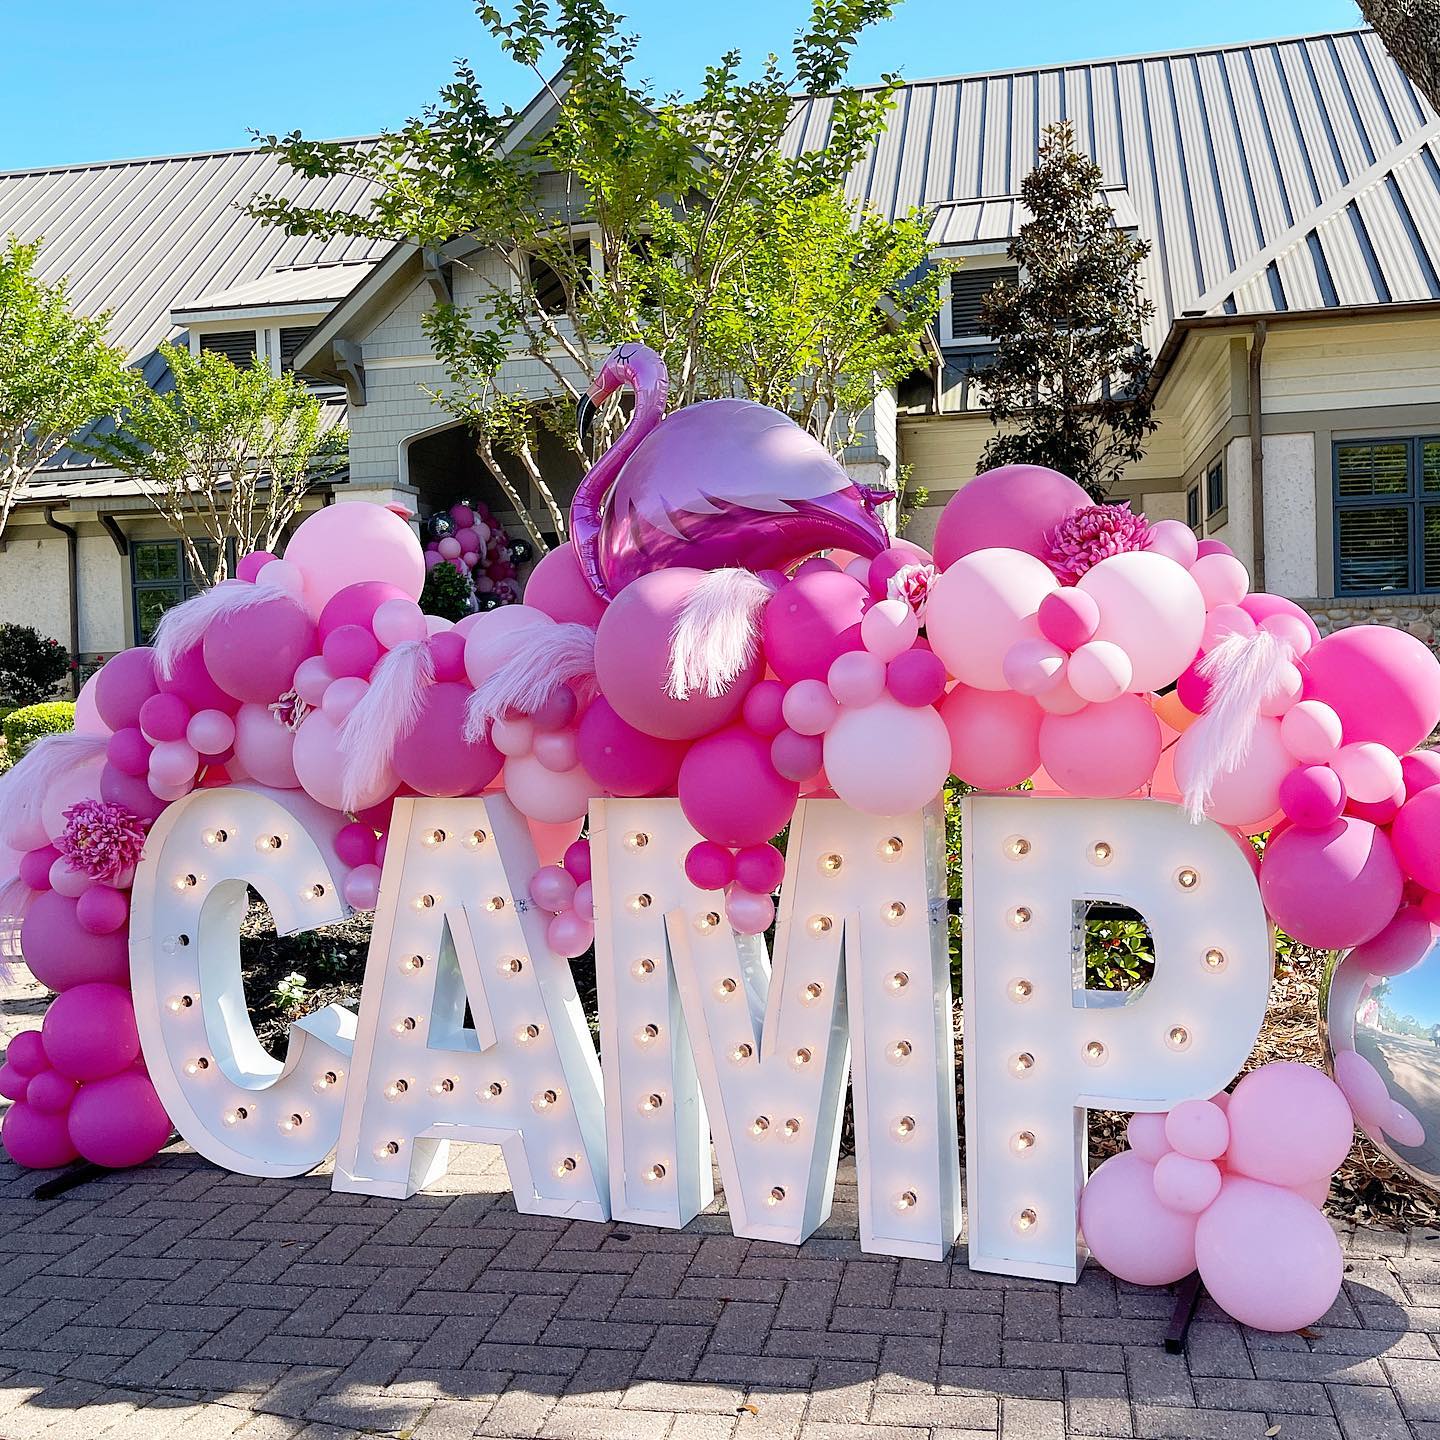 A met gala “camp” event; Florida style.🦩 For real though @ohana_institute throws the best student parties. 

#balloongarland #balloondecor #balloondisplay #balloons #organicballoons #marqueelights #marqueeletters #balloonstylist #eventstylist #partyinspiration #partyideas #balloonideas